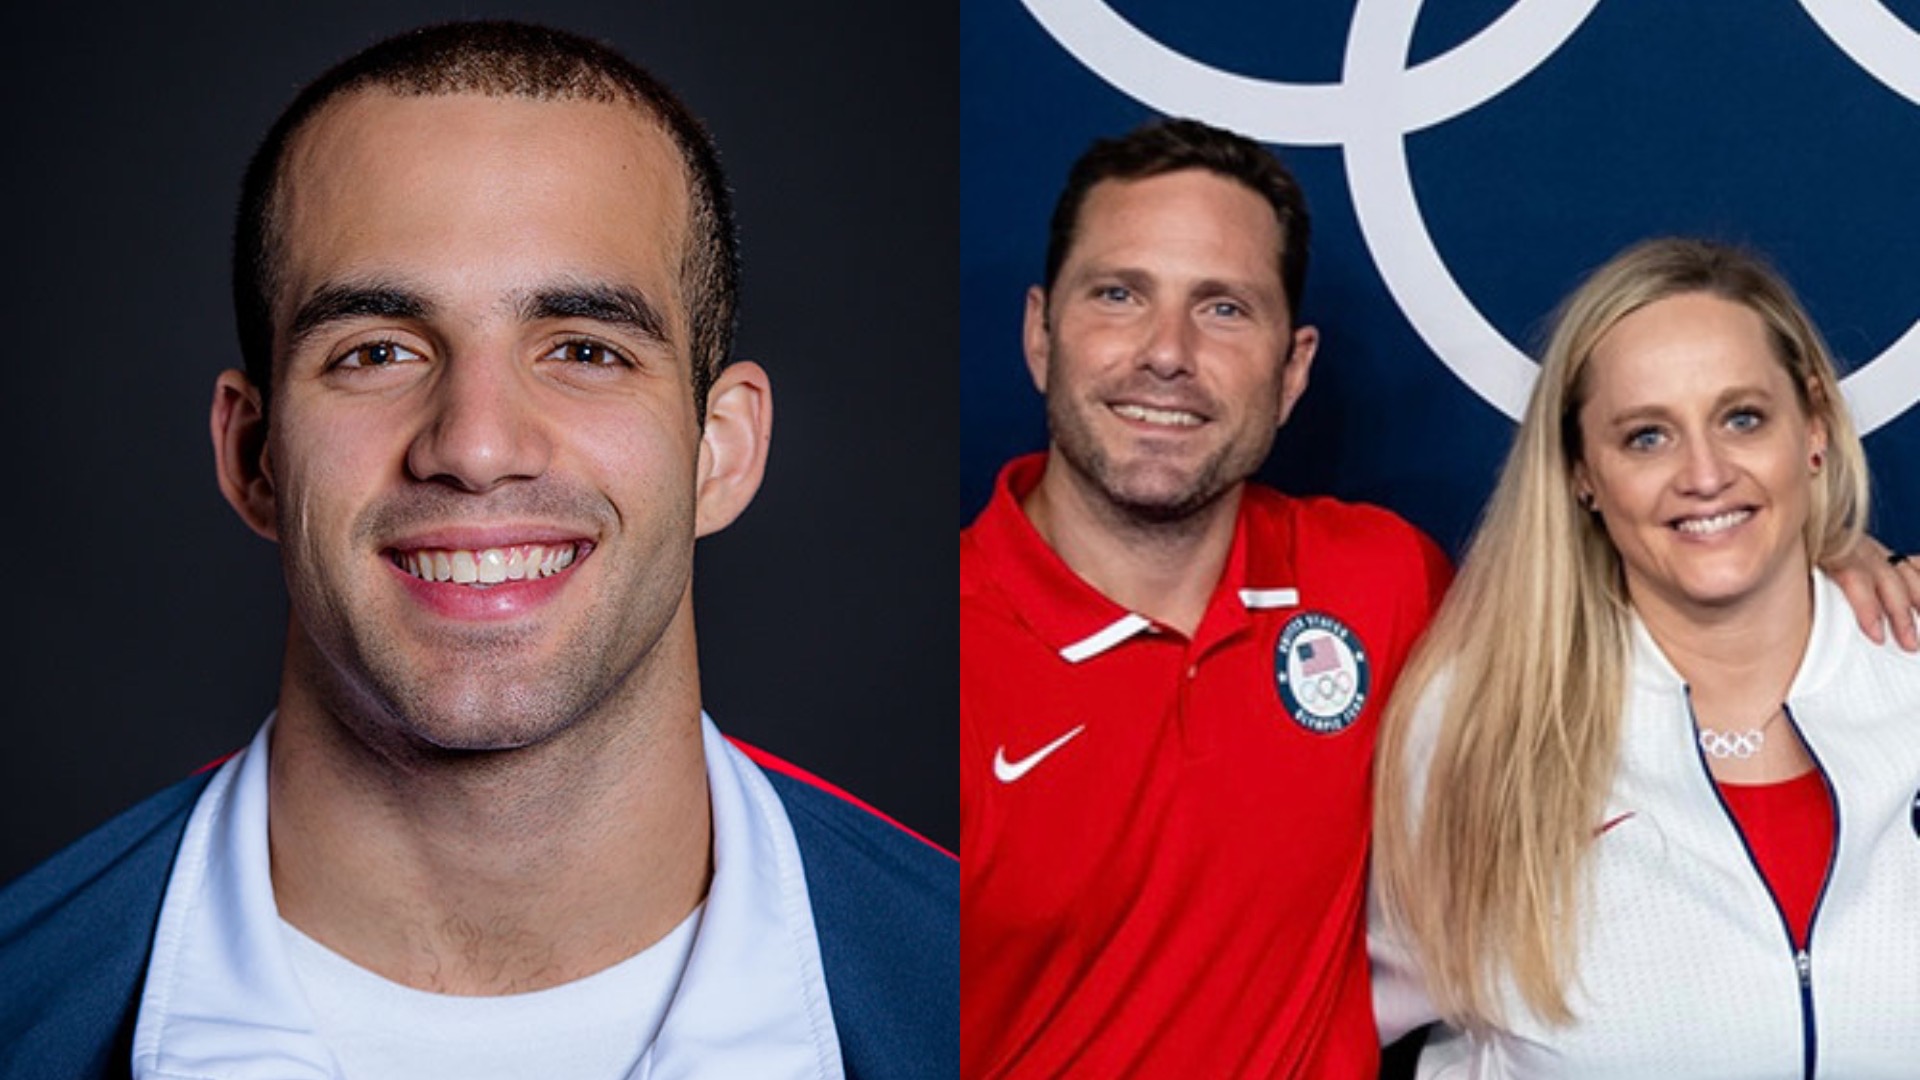 Danell Leyva (left) and Cecile and Laurent Landi (right) headline the USA Gymnastics 2023 Hall of Fame class.